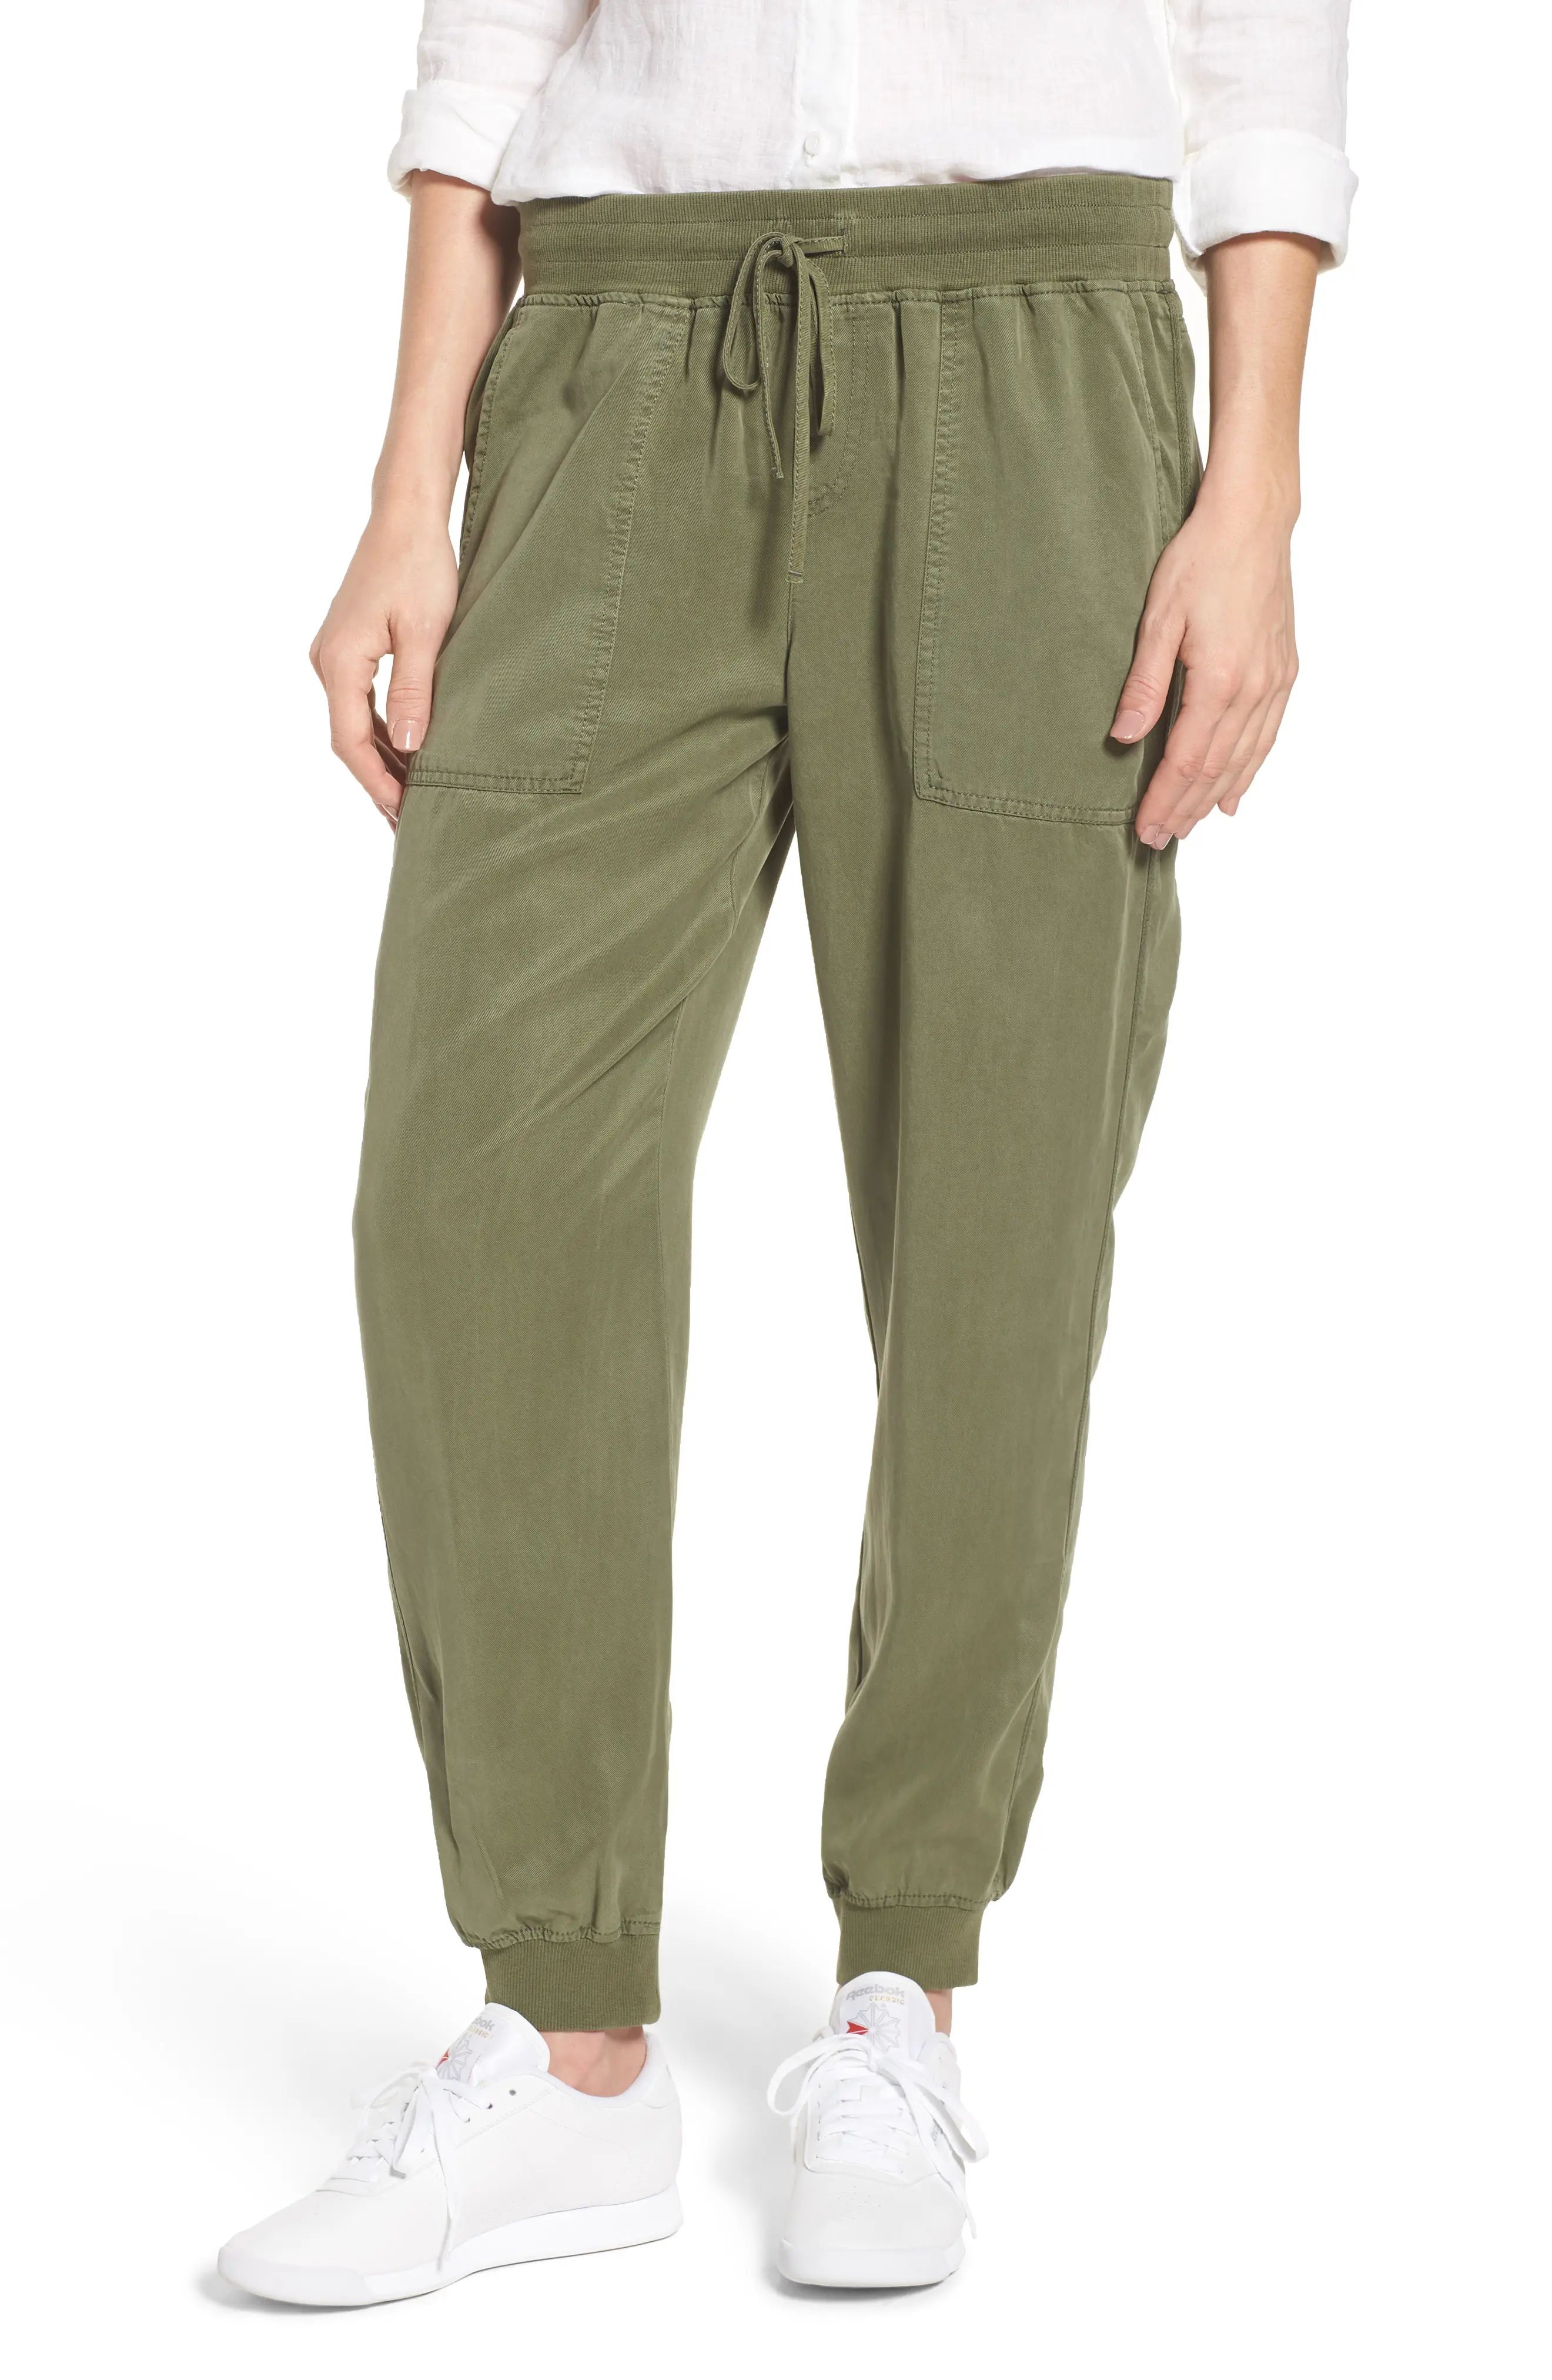 Women's Vince Camuto Twill Jogger Pants, Size X-Small - Green | Nordstrom